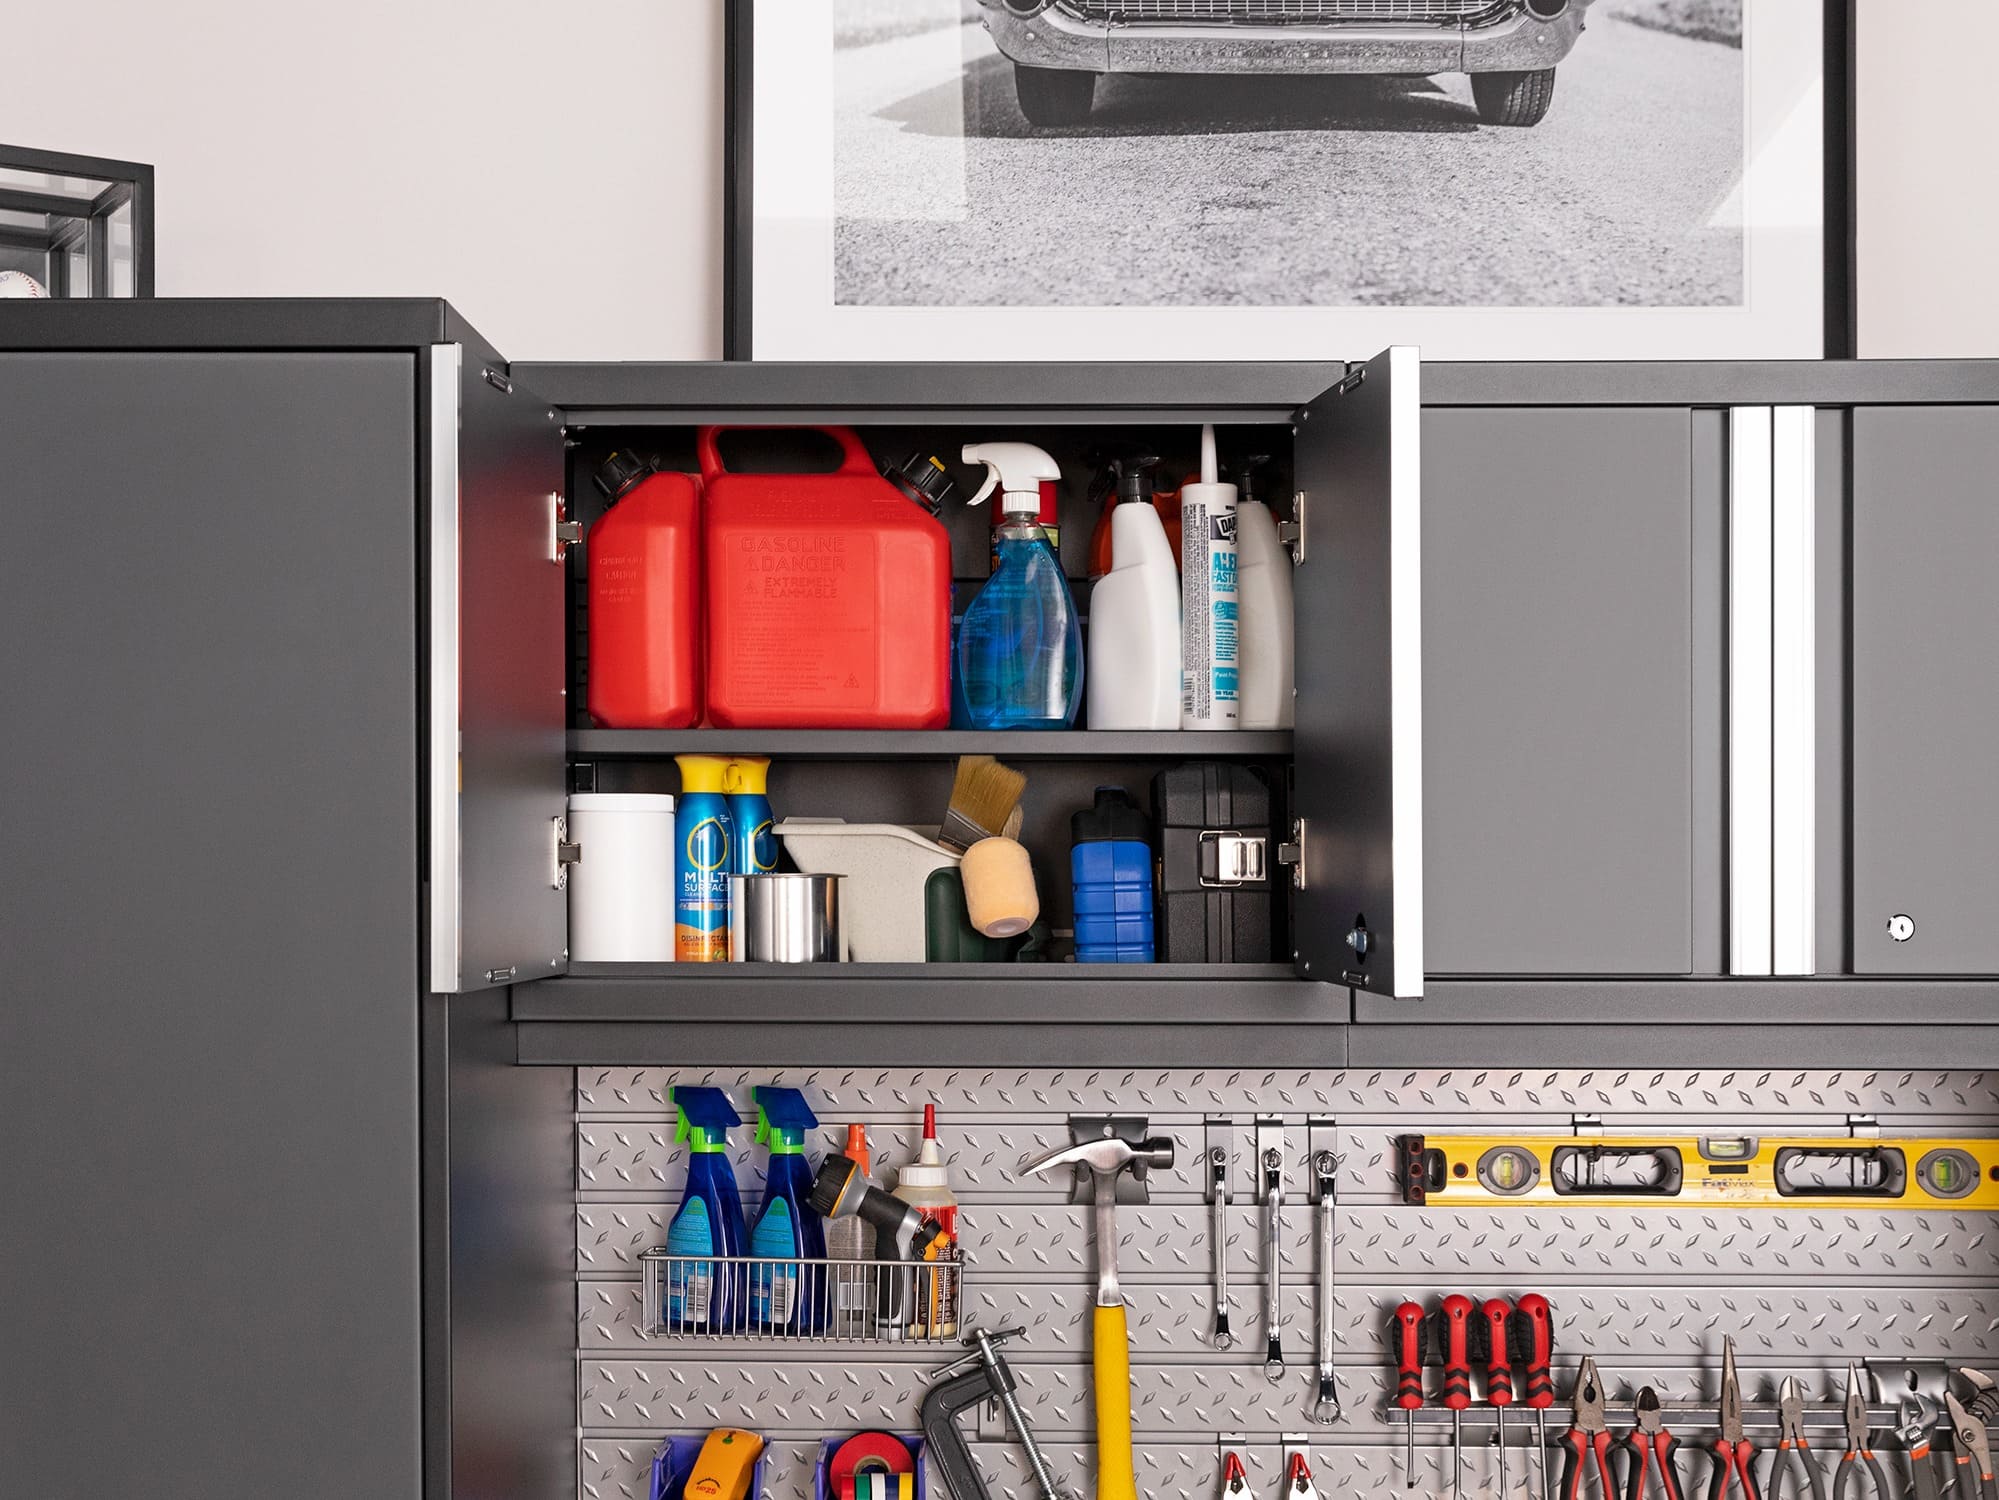 Wall cabinets are great for storing your cleaning supplies and other smaller items. Image from NewAge ProSeries Cabinetry.